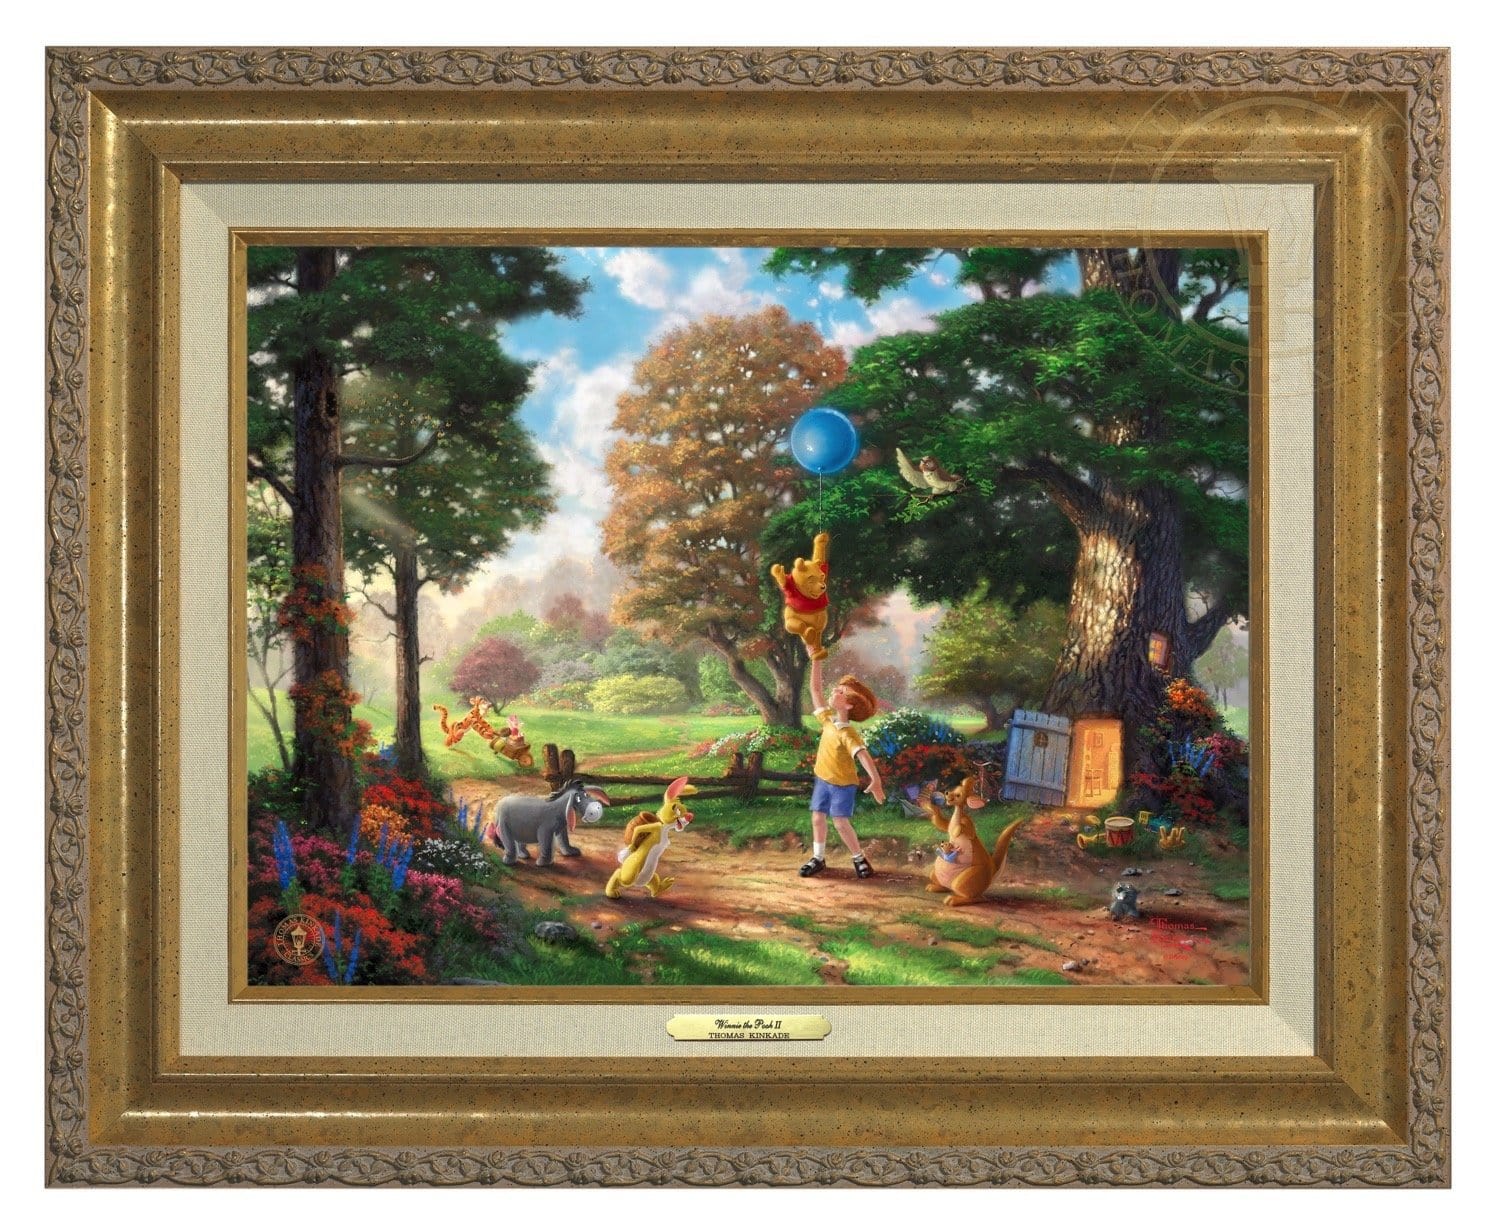 Winnie the Pooh II - Christopher Robin, Winnie the Pooh and the delightful menagerie of friends as they all adventured in the Hundred Acre Wood - Antique Gold Frame.